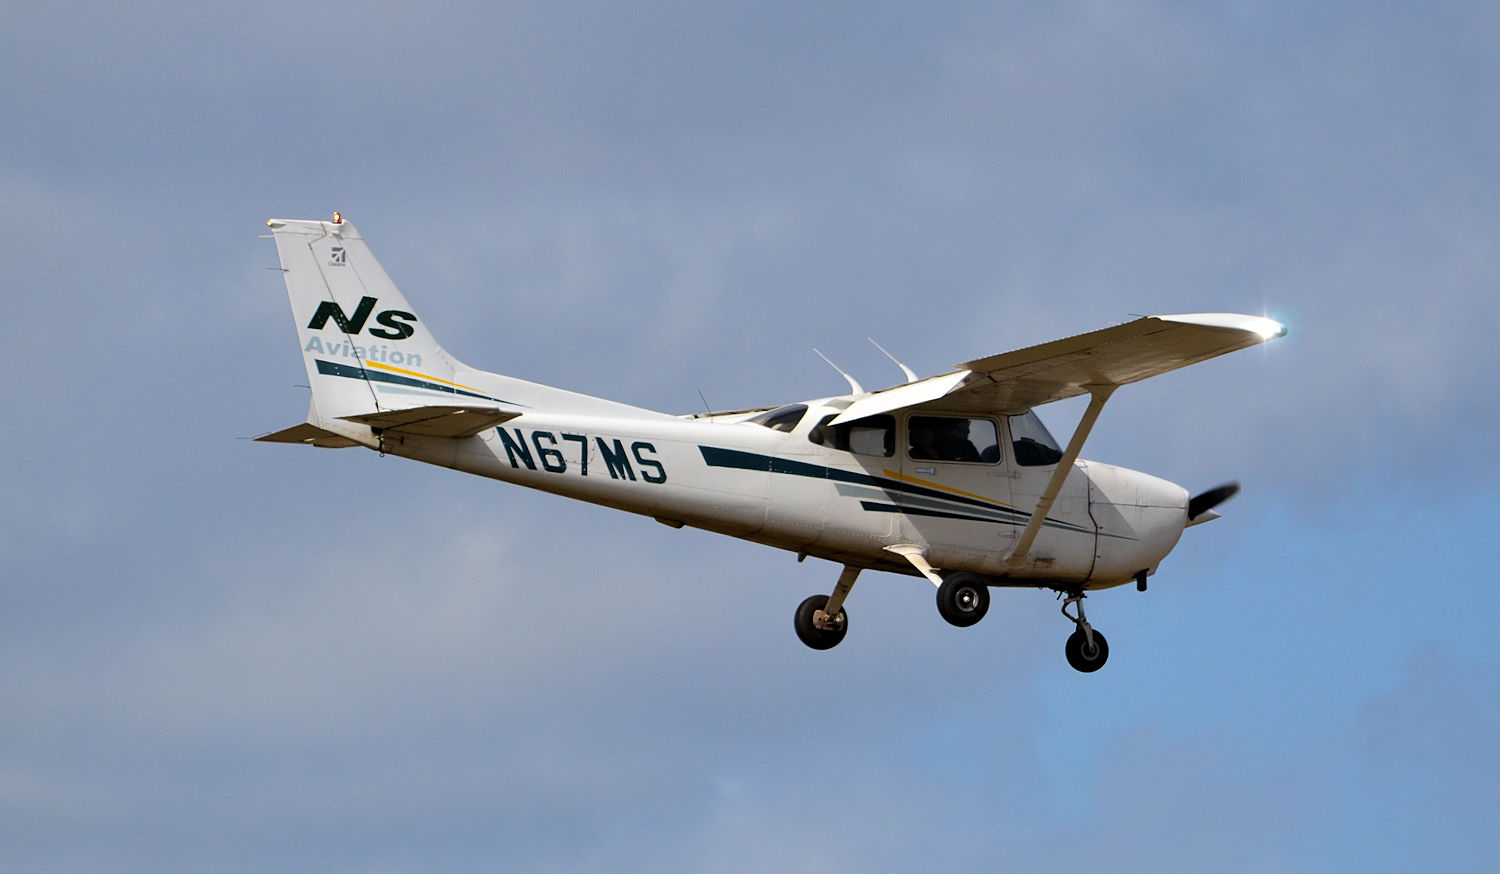 N67MS/N67MS Private Cessna Cessna 172S Skyhawk Photo by Warthog1 - AVSpotters.com